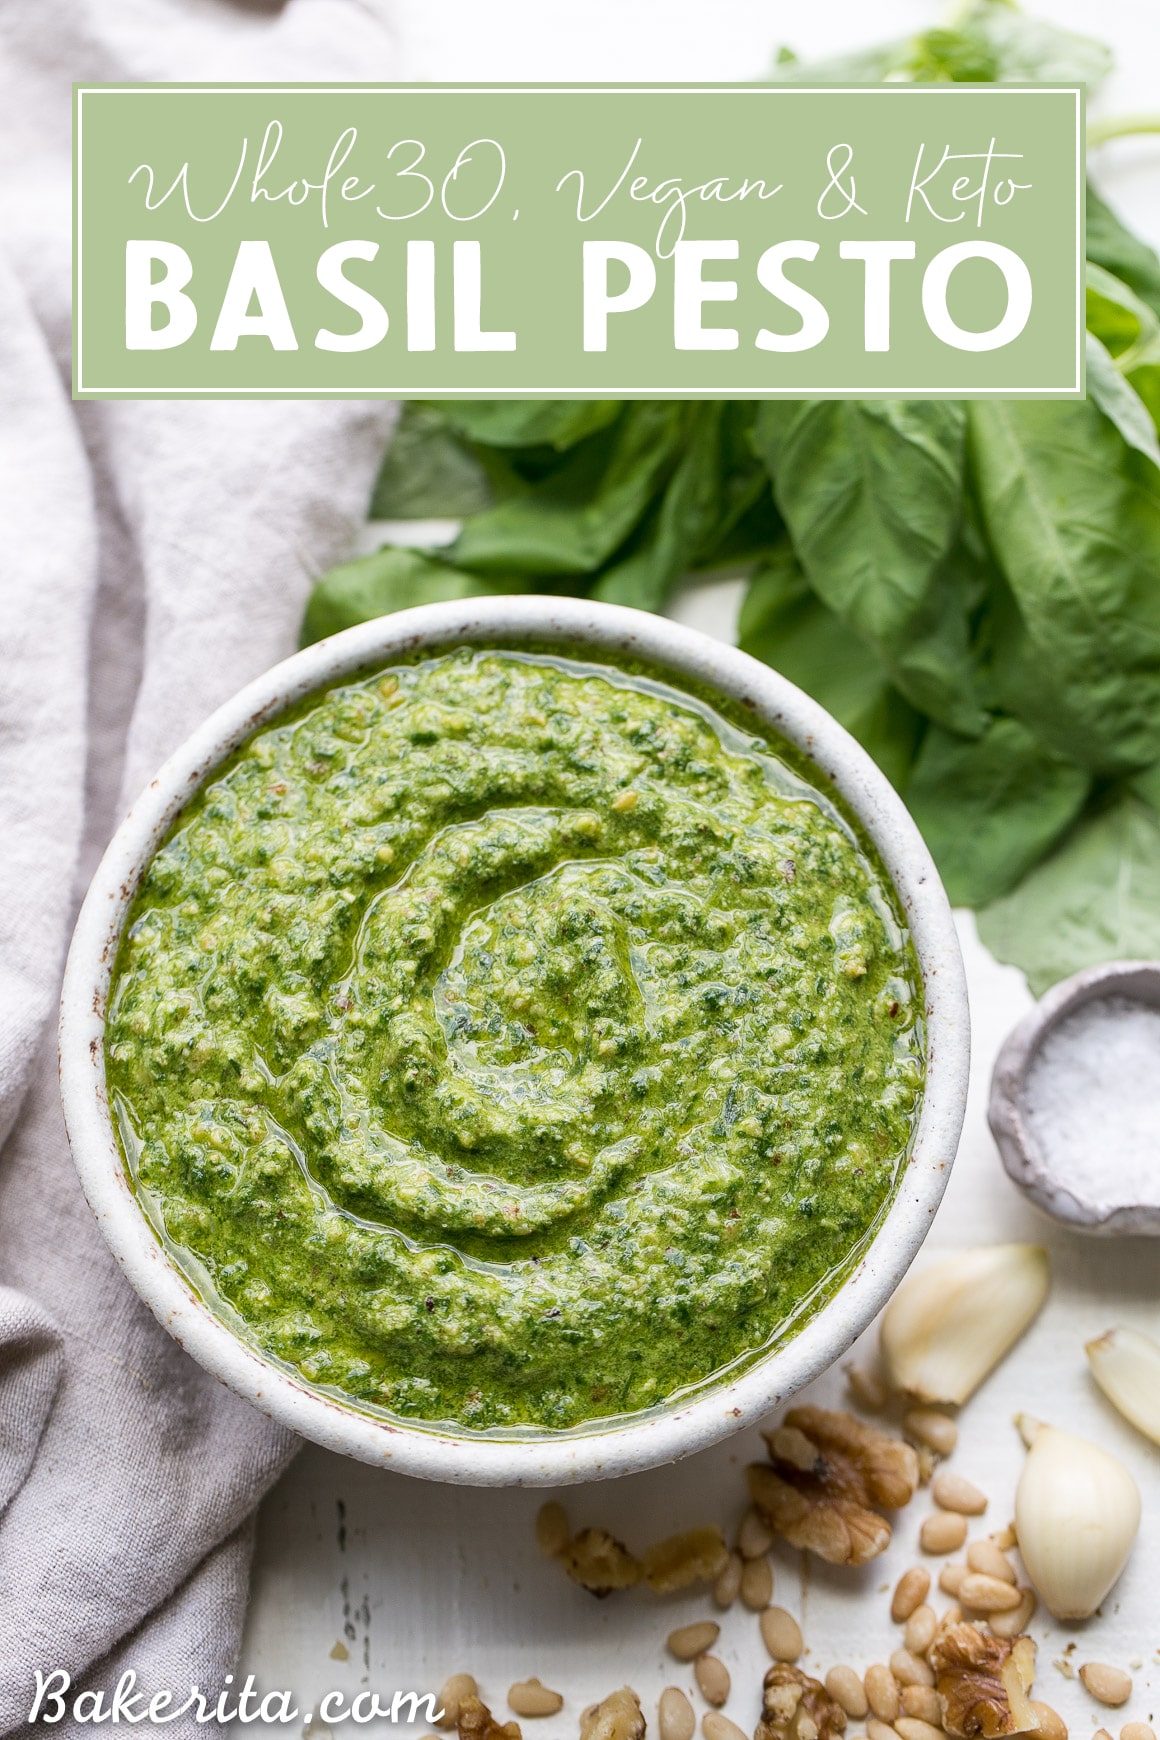 This Spinach Basil Pesto is loaded with bright herby flavor and made in just a few minutes. You won't miss the cheese in this paleo, vegan, keto + Whole30-friendly pesto. It will make any meal more flavorful, whether it's tossed with pasta, enjoyed with your favorite protein, or used as a spread.